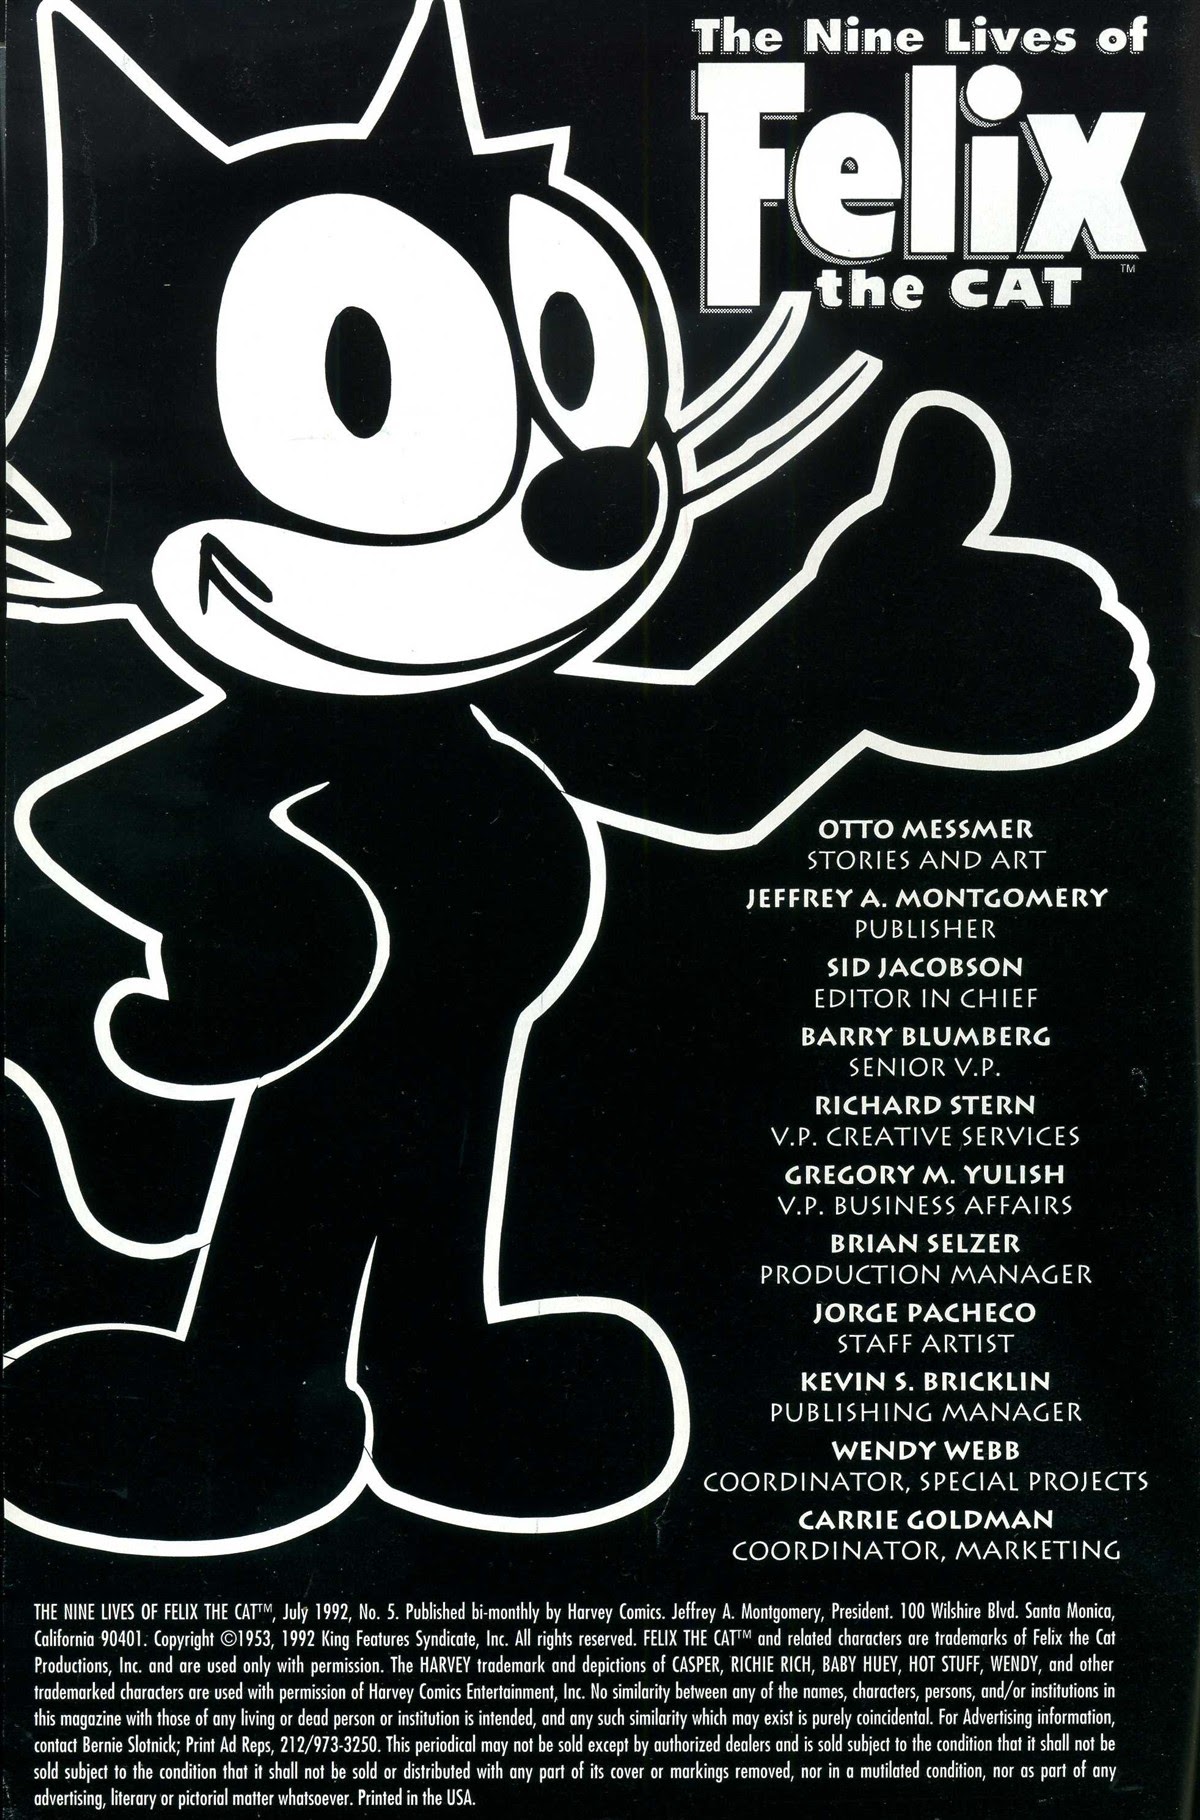 Read online Nine Lives of Felix the Cat comic -  Issue #5 - 2